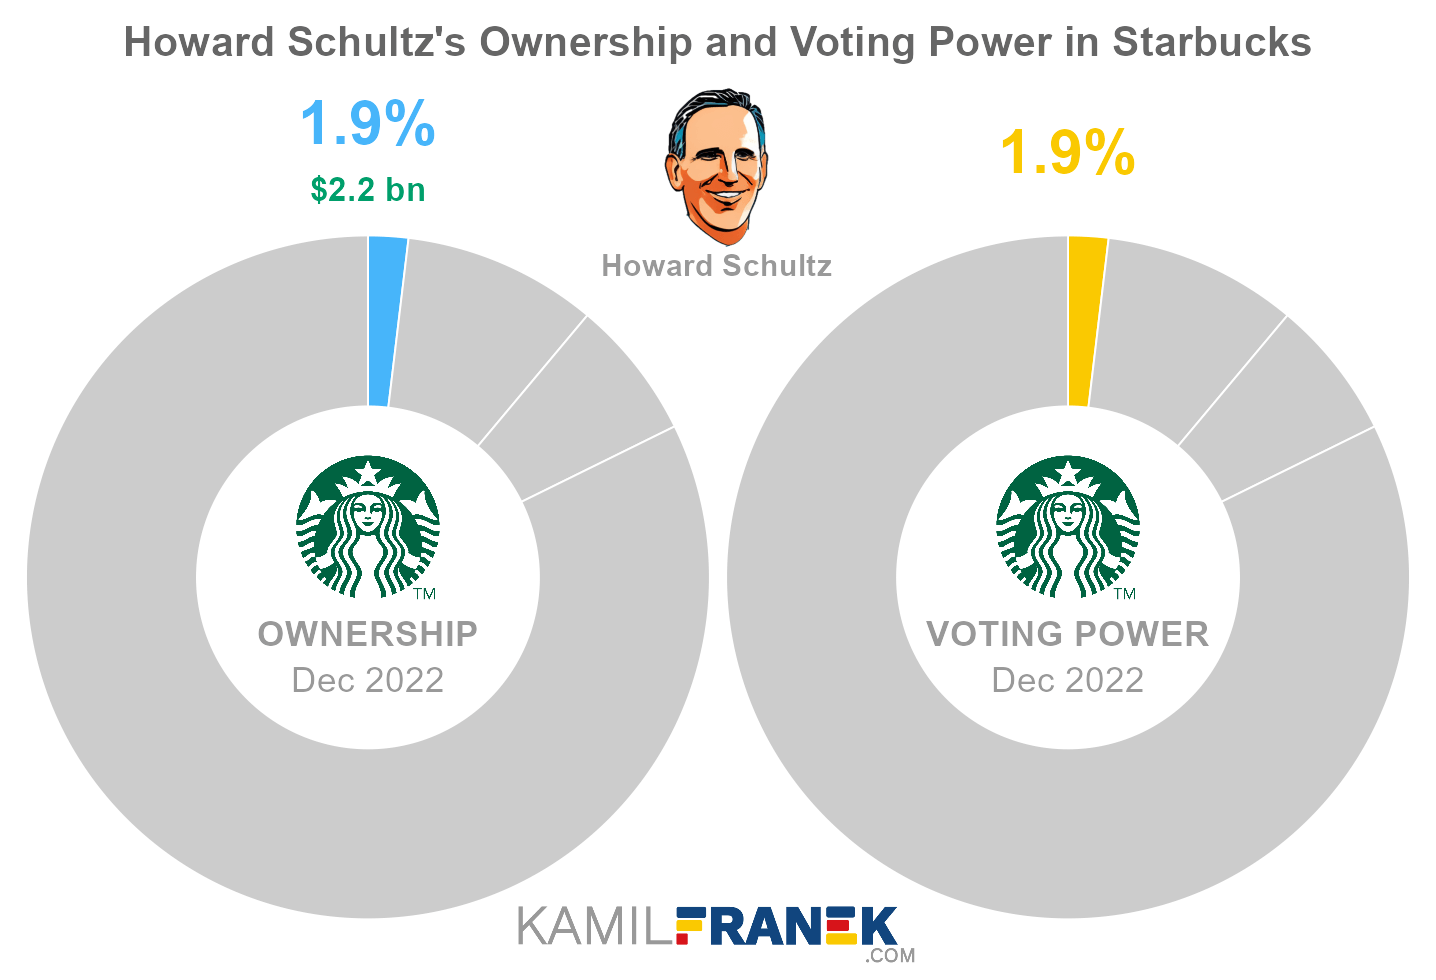 Howard Schultz's share ownership and voting power in Starbucks (chart)